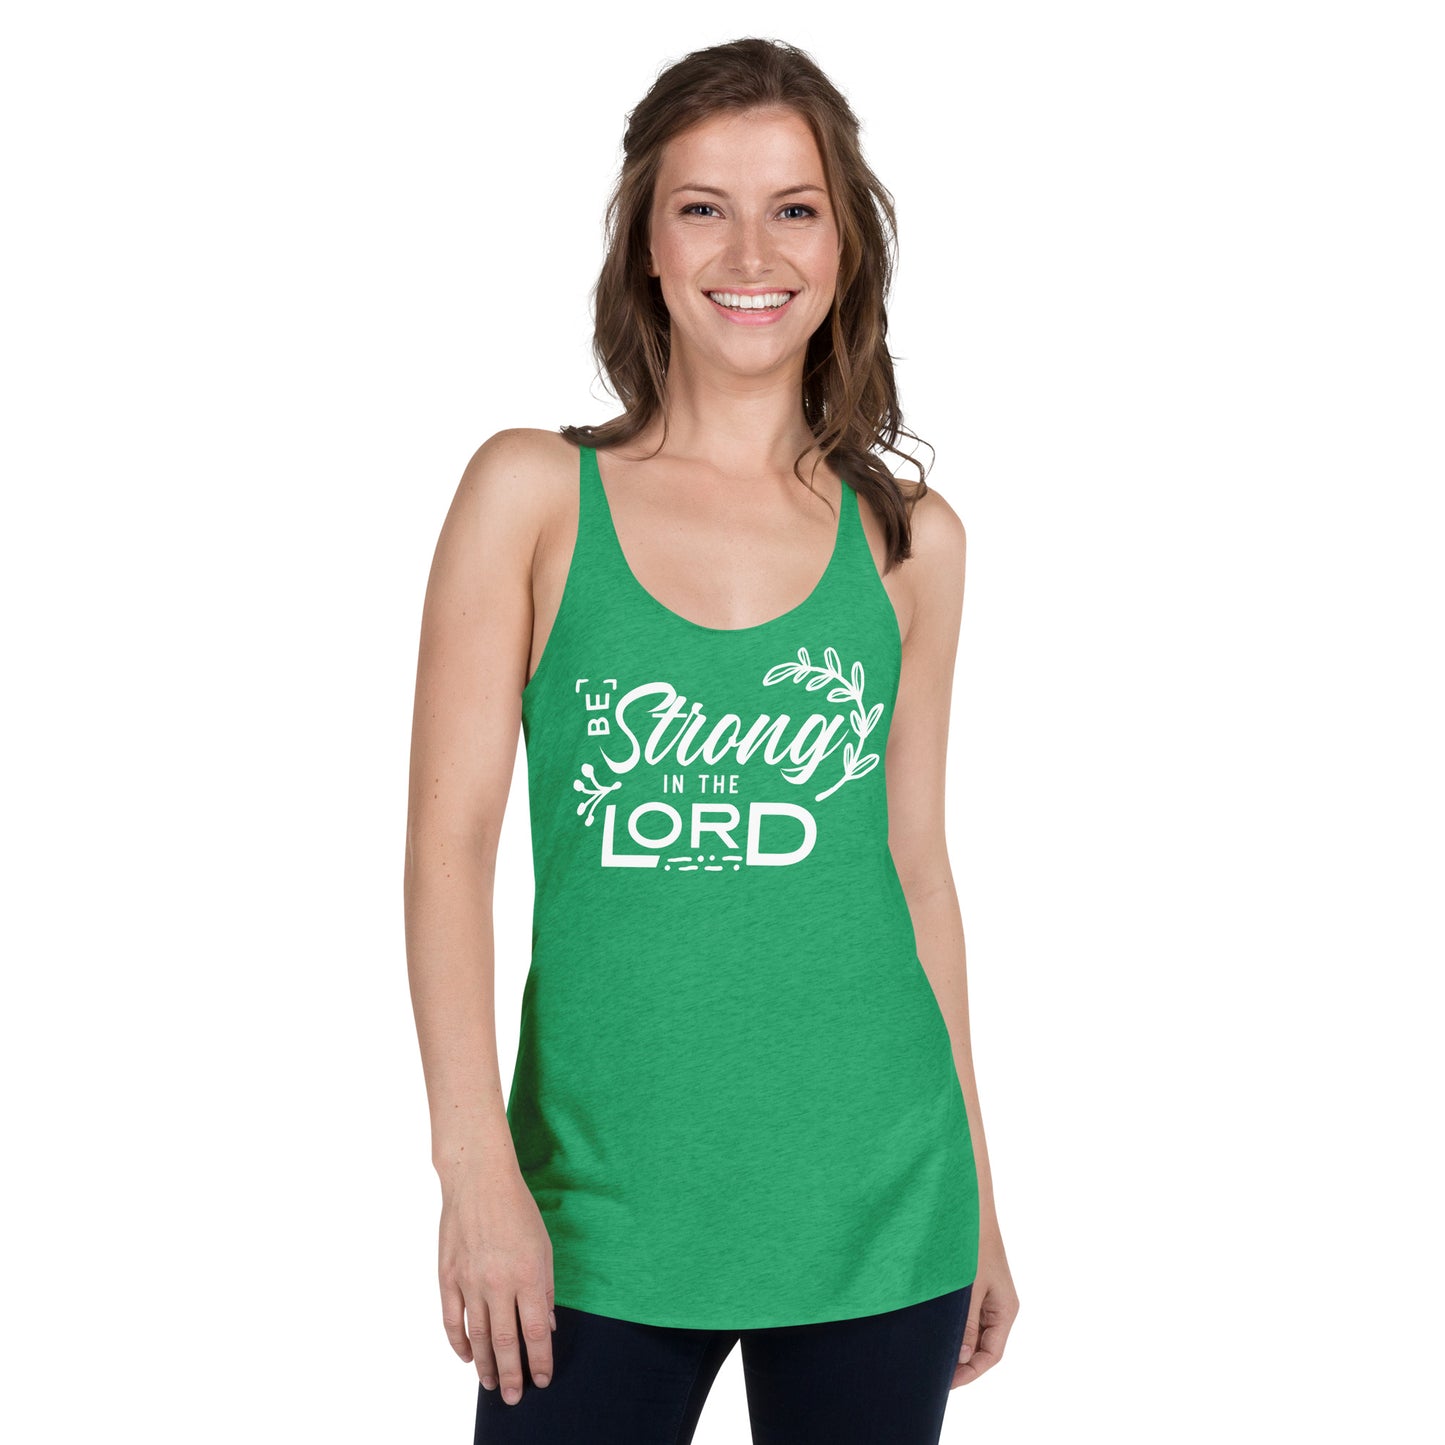 Be Strong in the Lord Women's Racerback Tank